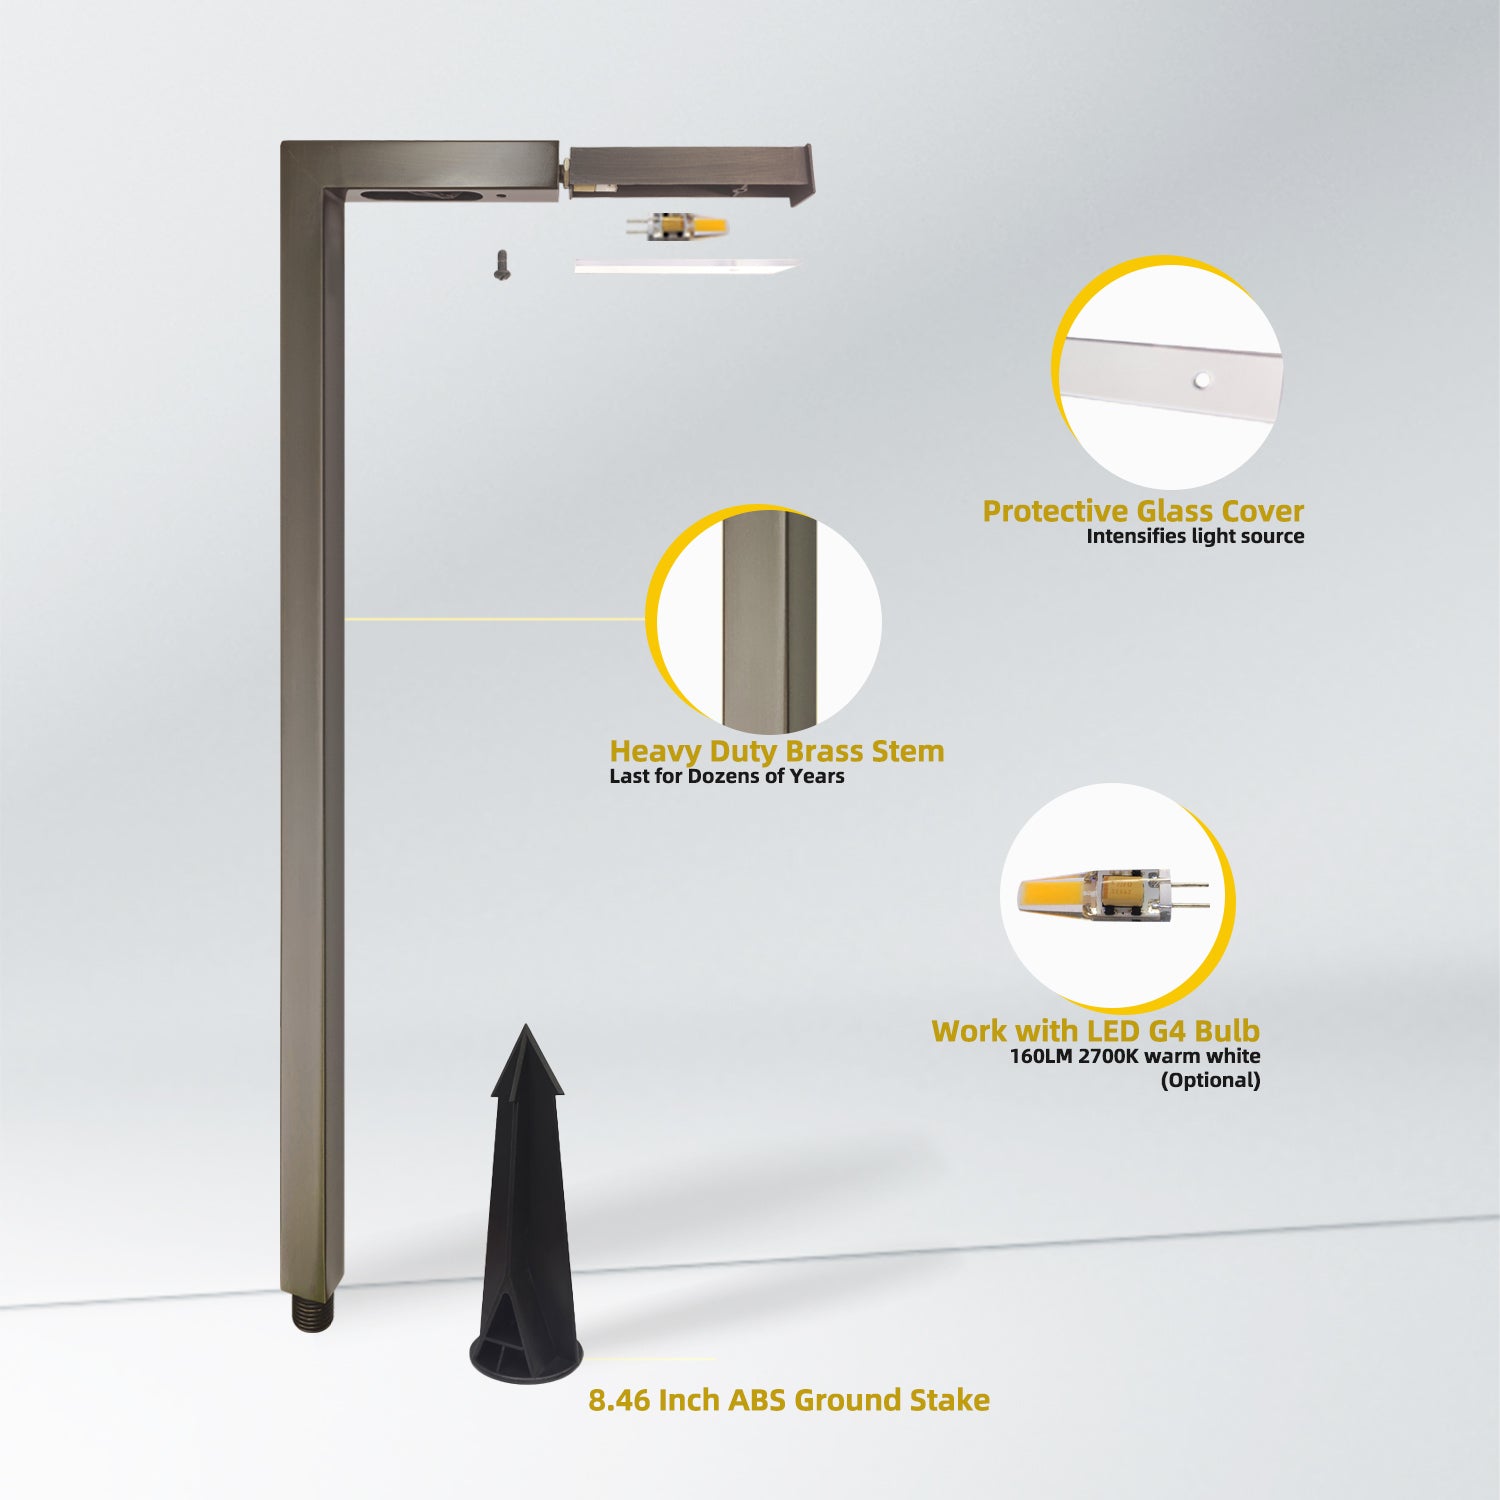 Low voltage outdoor brass path light with protective glass cover, heavy-duty brass stem, LED G4 bulb compatibility, and 8.46 inch ABS ground stake. Ideal for garden and landscape lighting.